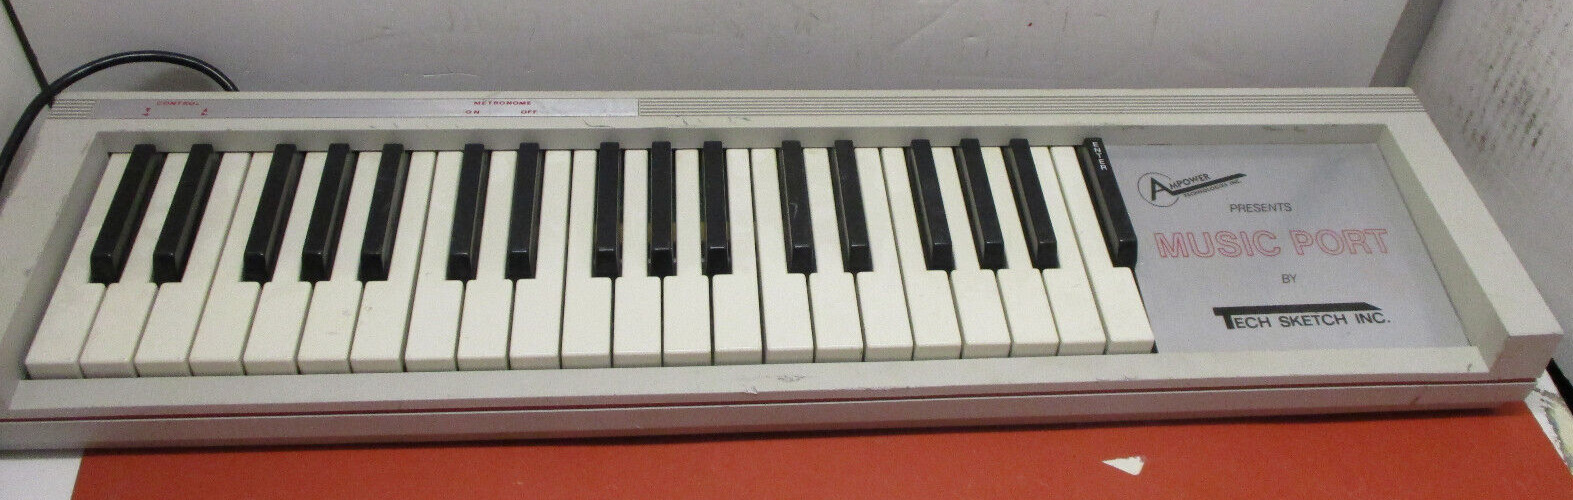 Vintage Ampower Tech Sketch  Music Port Keyboard For Vintage Computer Commodore